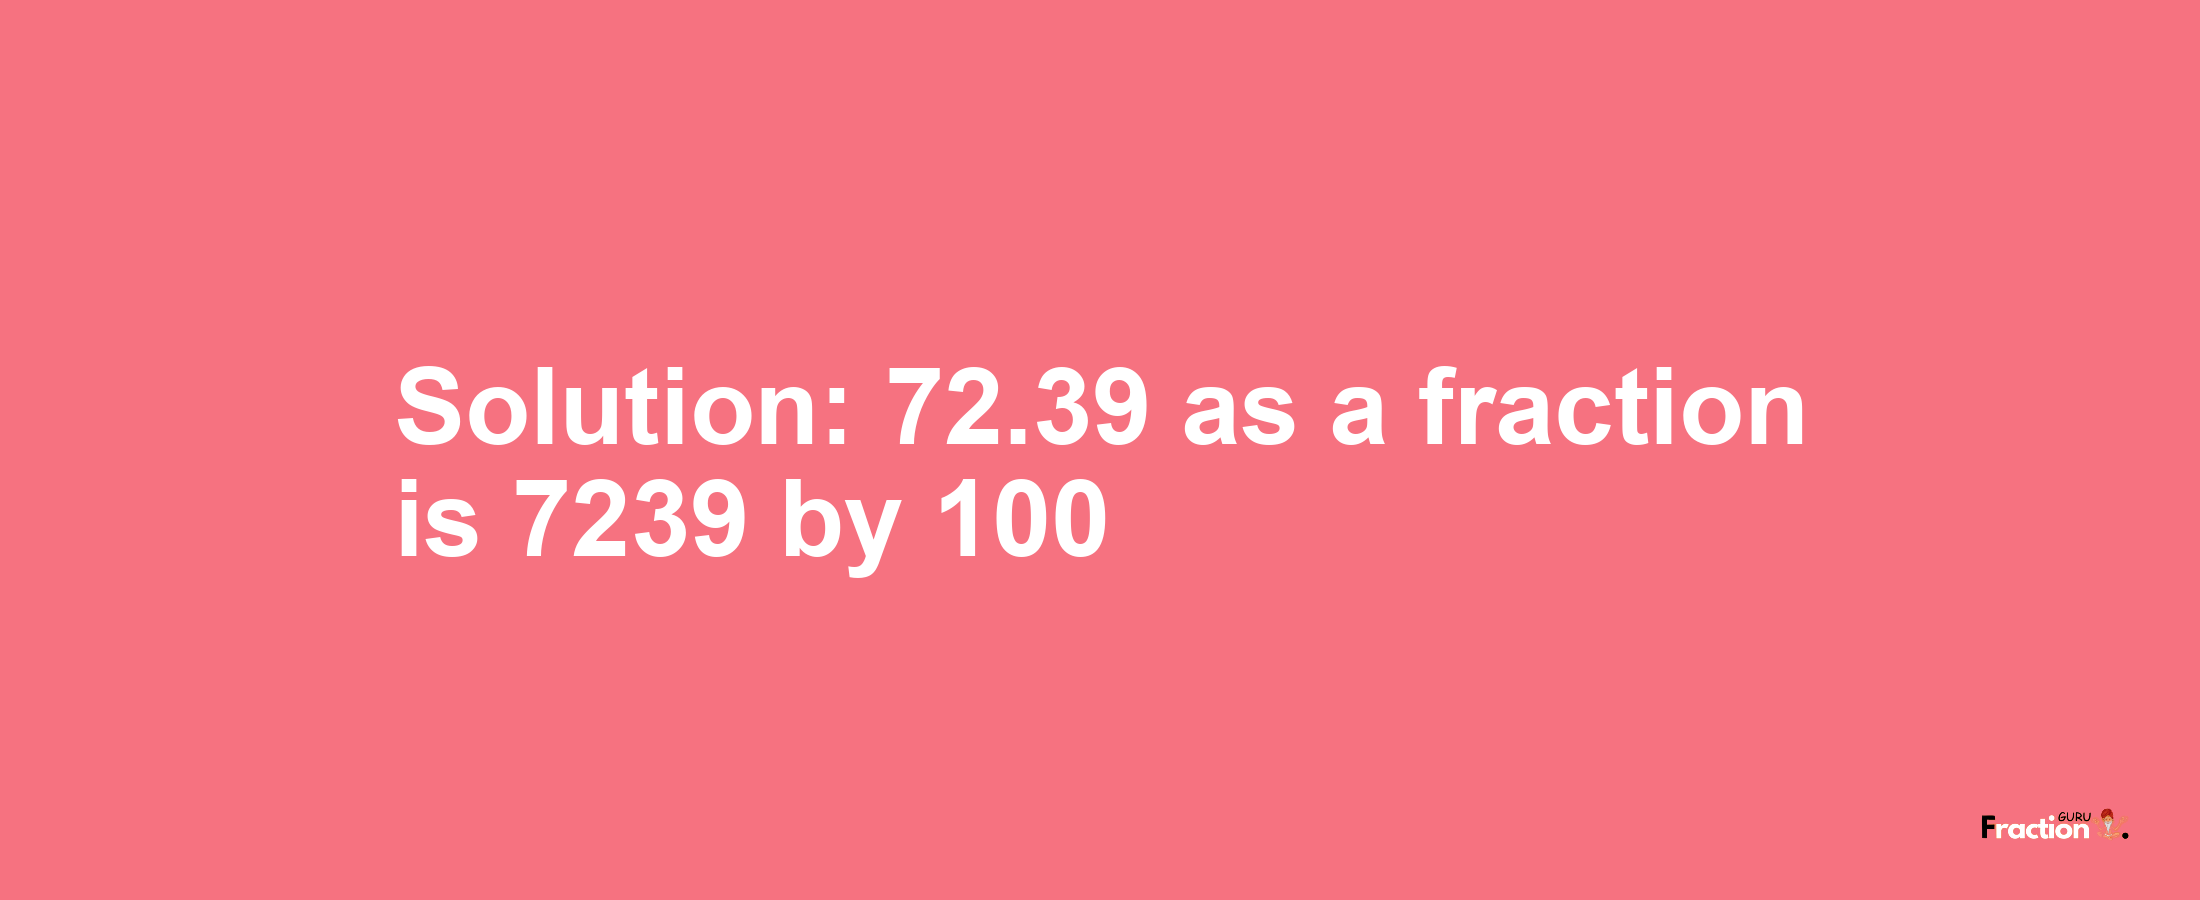 Solution:72.39 as a fraction is 7239/100